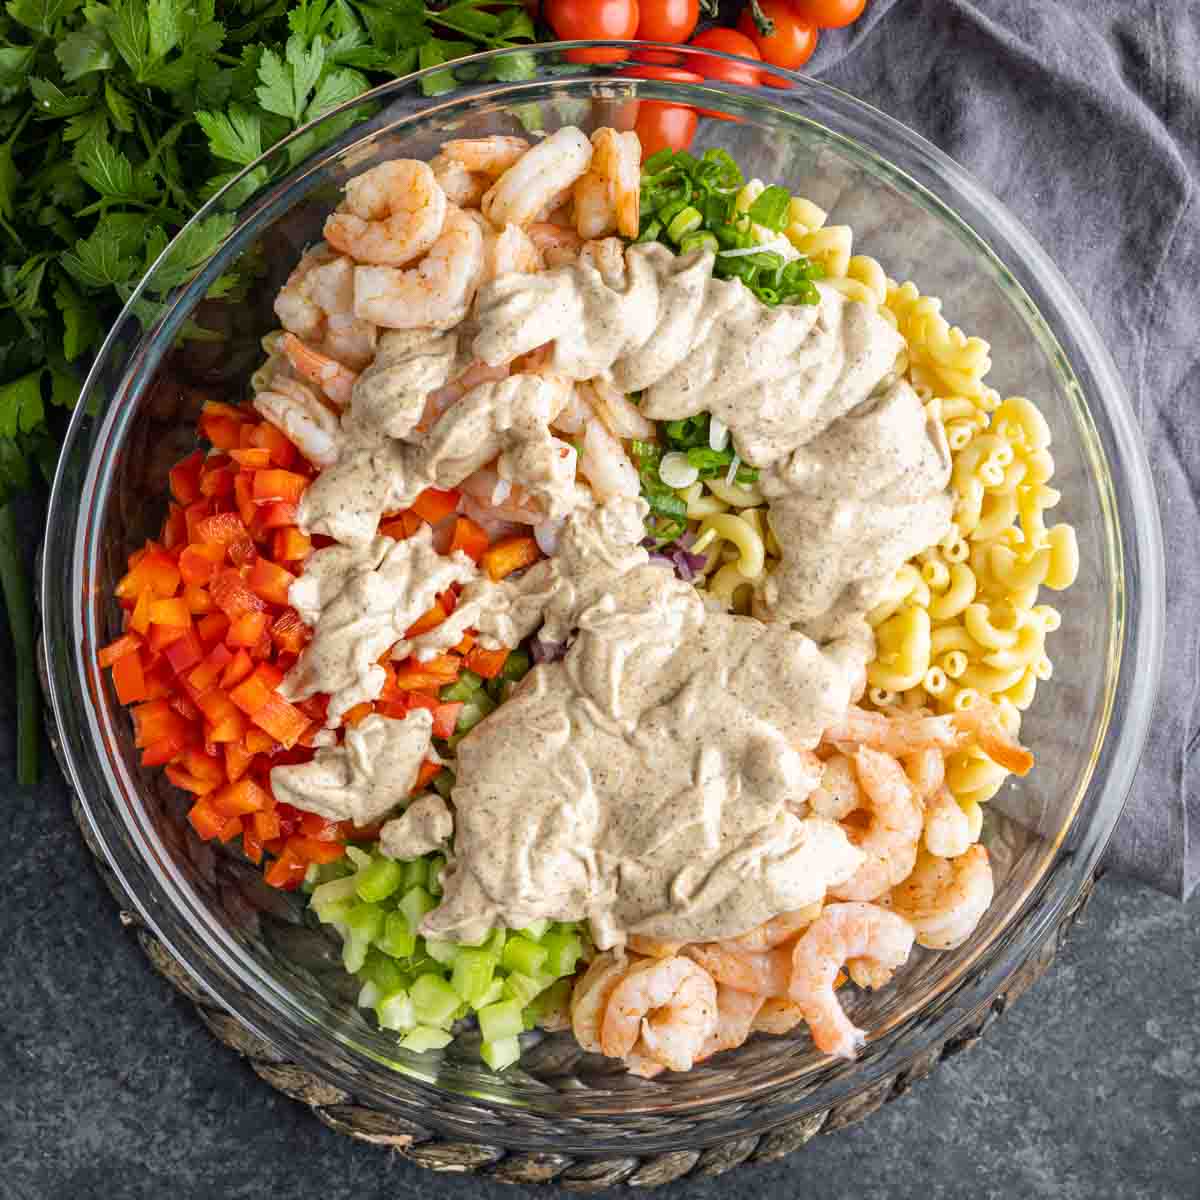 Shrimp Pasta Salad ingredients in a glass bowl with dressing